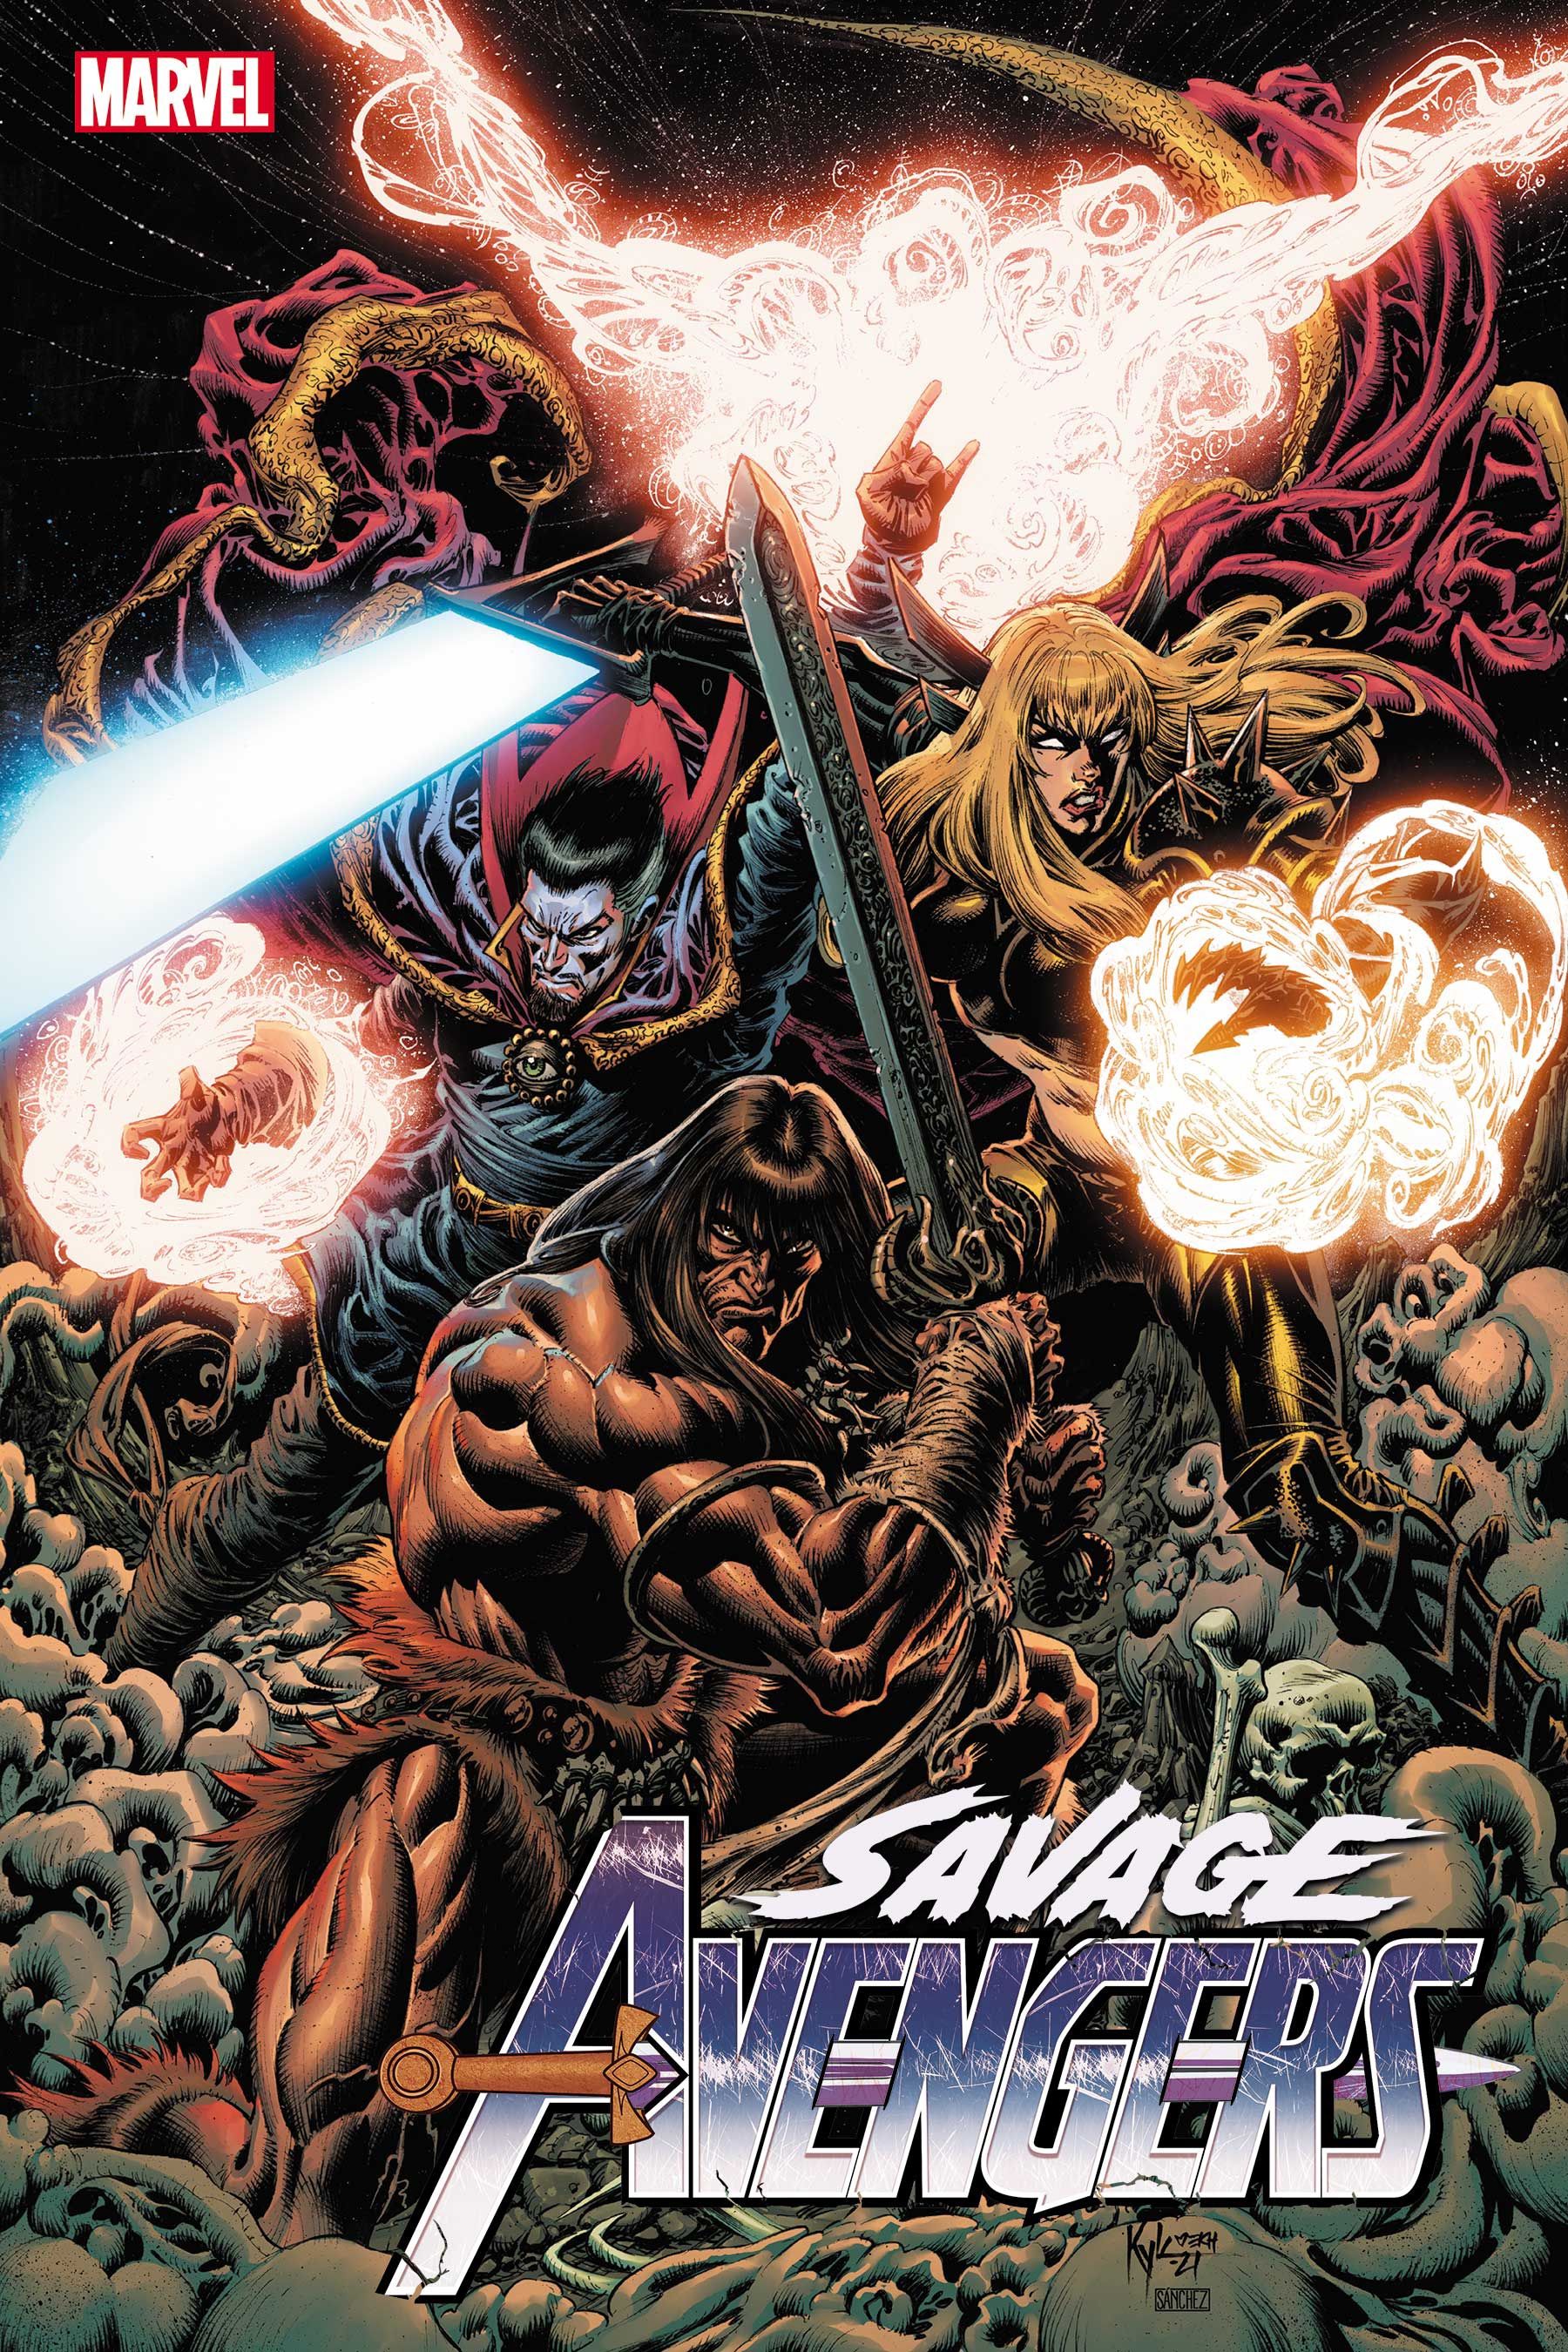 Savage Avengers cover featuring Doctor Strange, Majik and Conan fighting